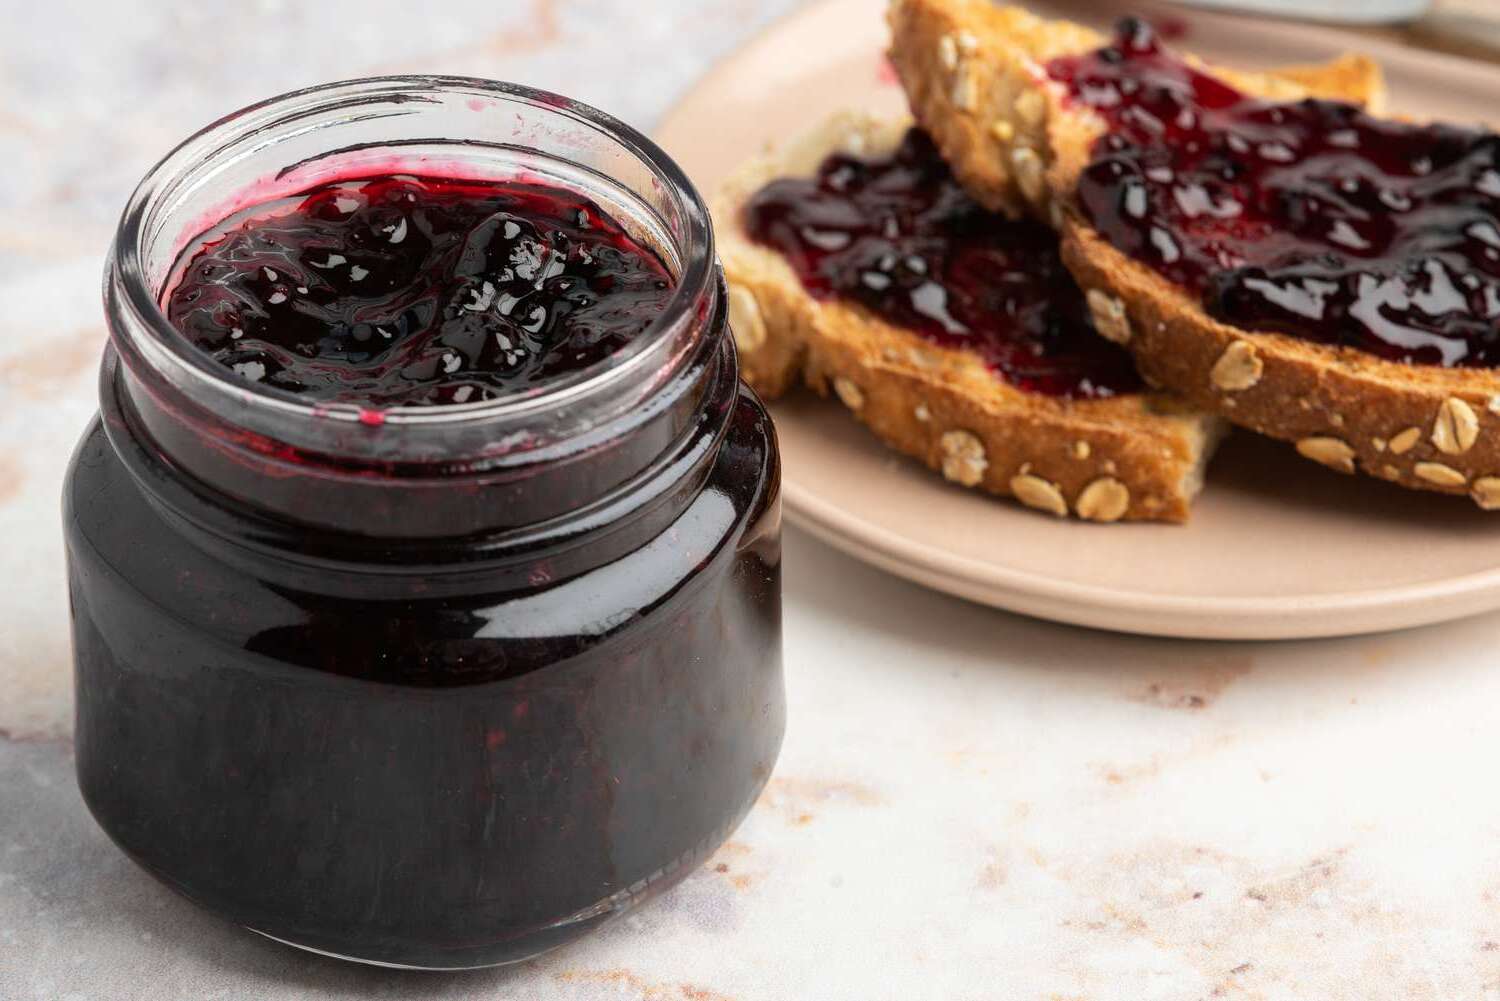 Deliciously Easy: A Review of the Jam Making Kit for Her